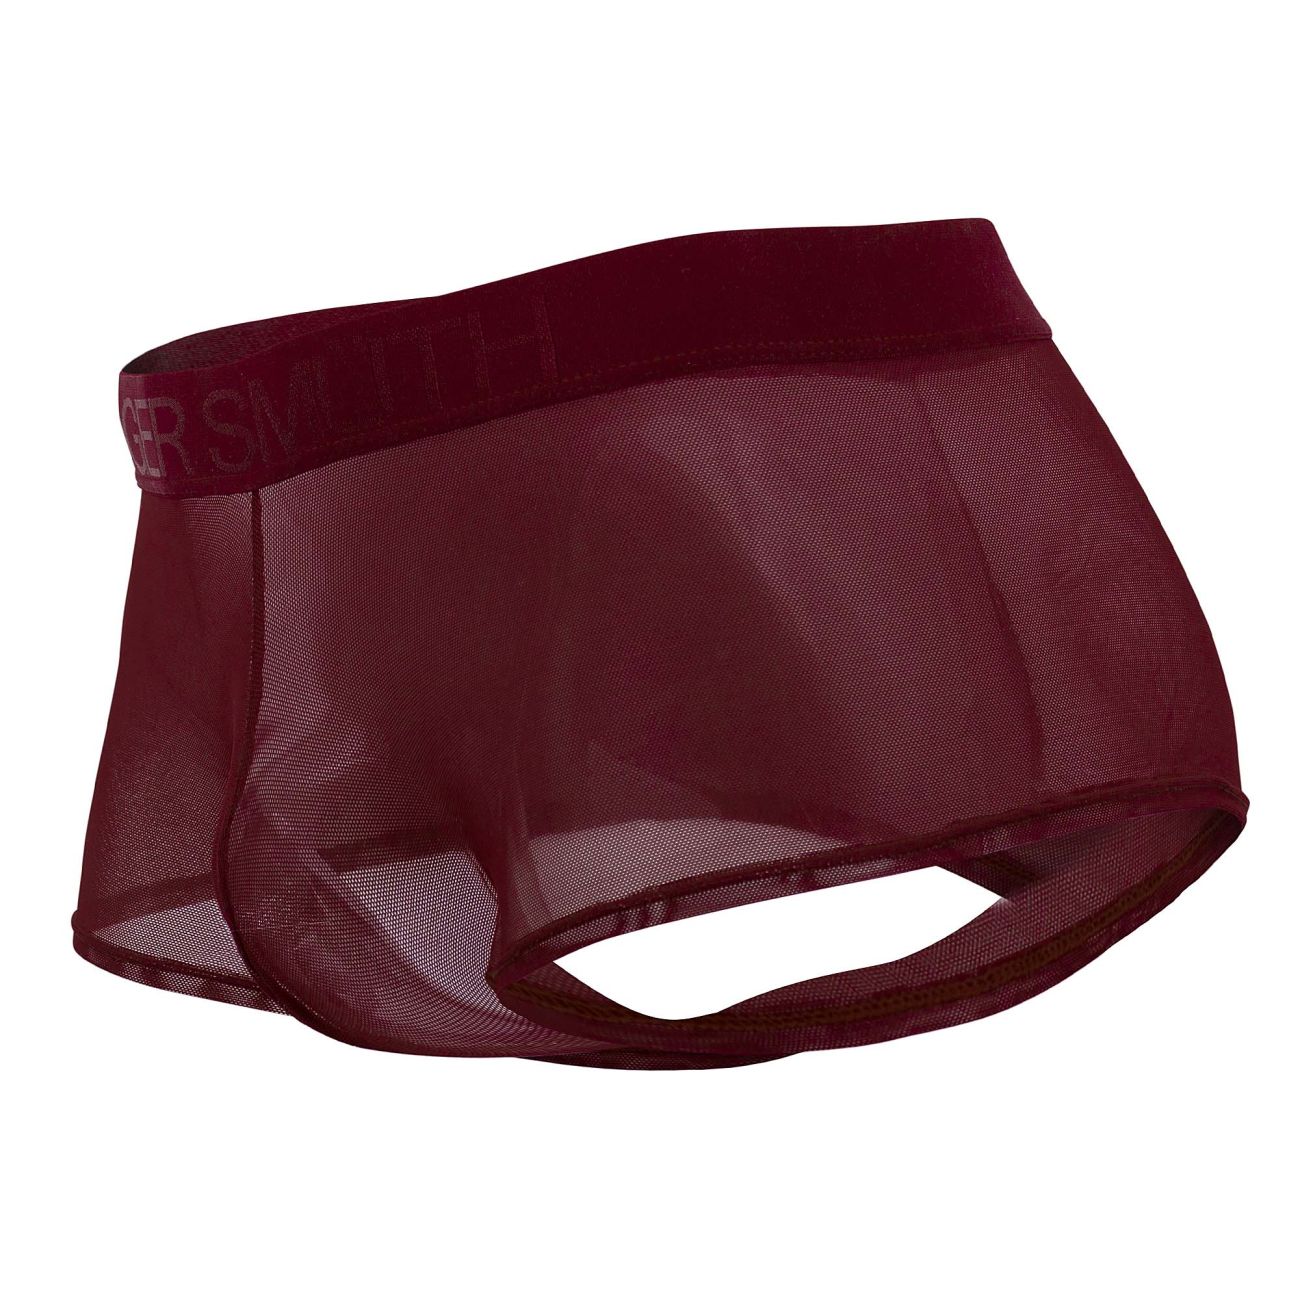 Roger Smuth RS060 Trunks